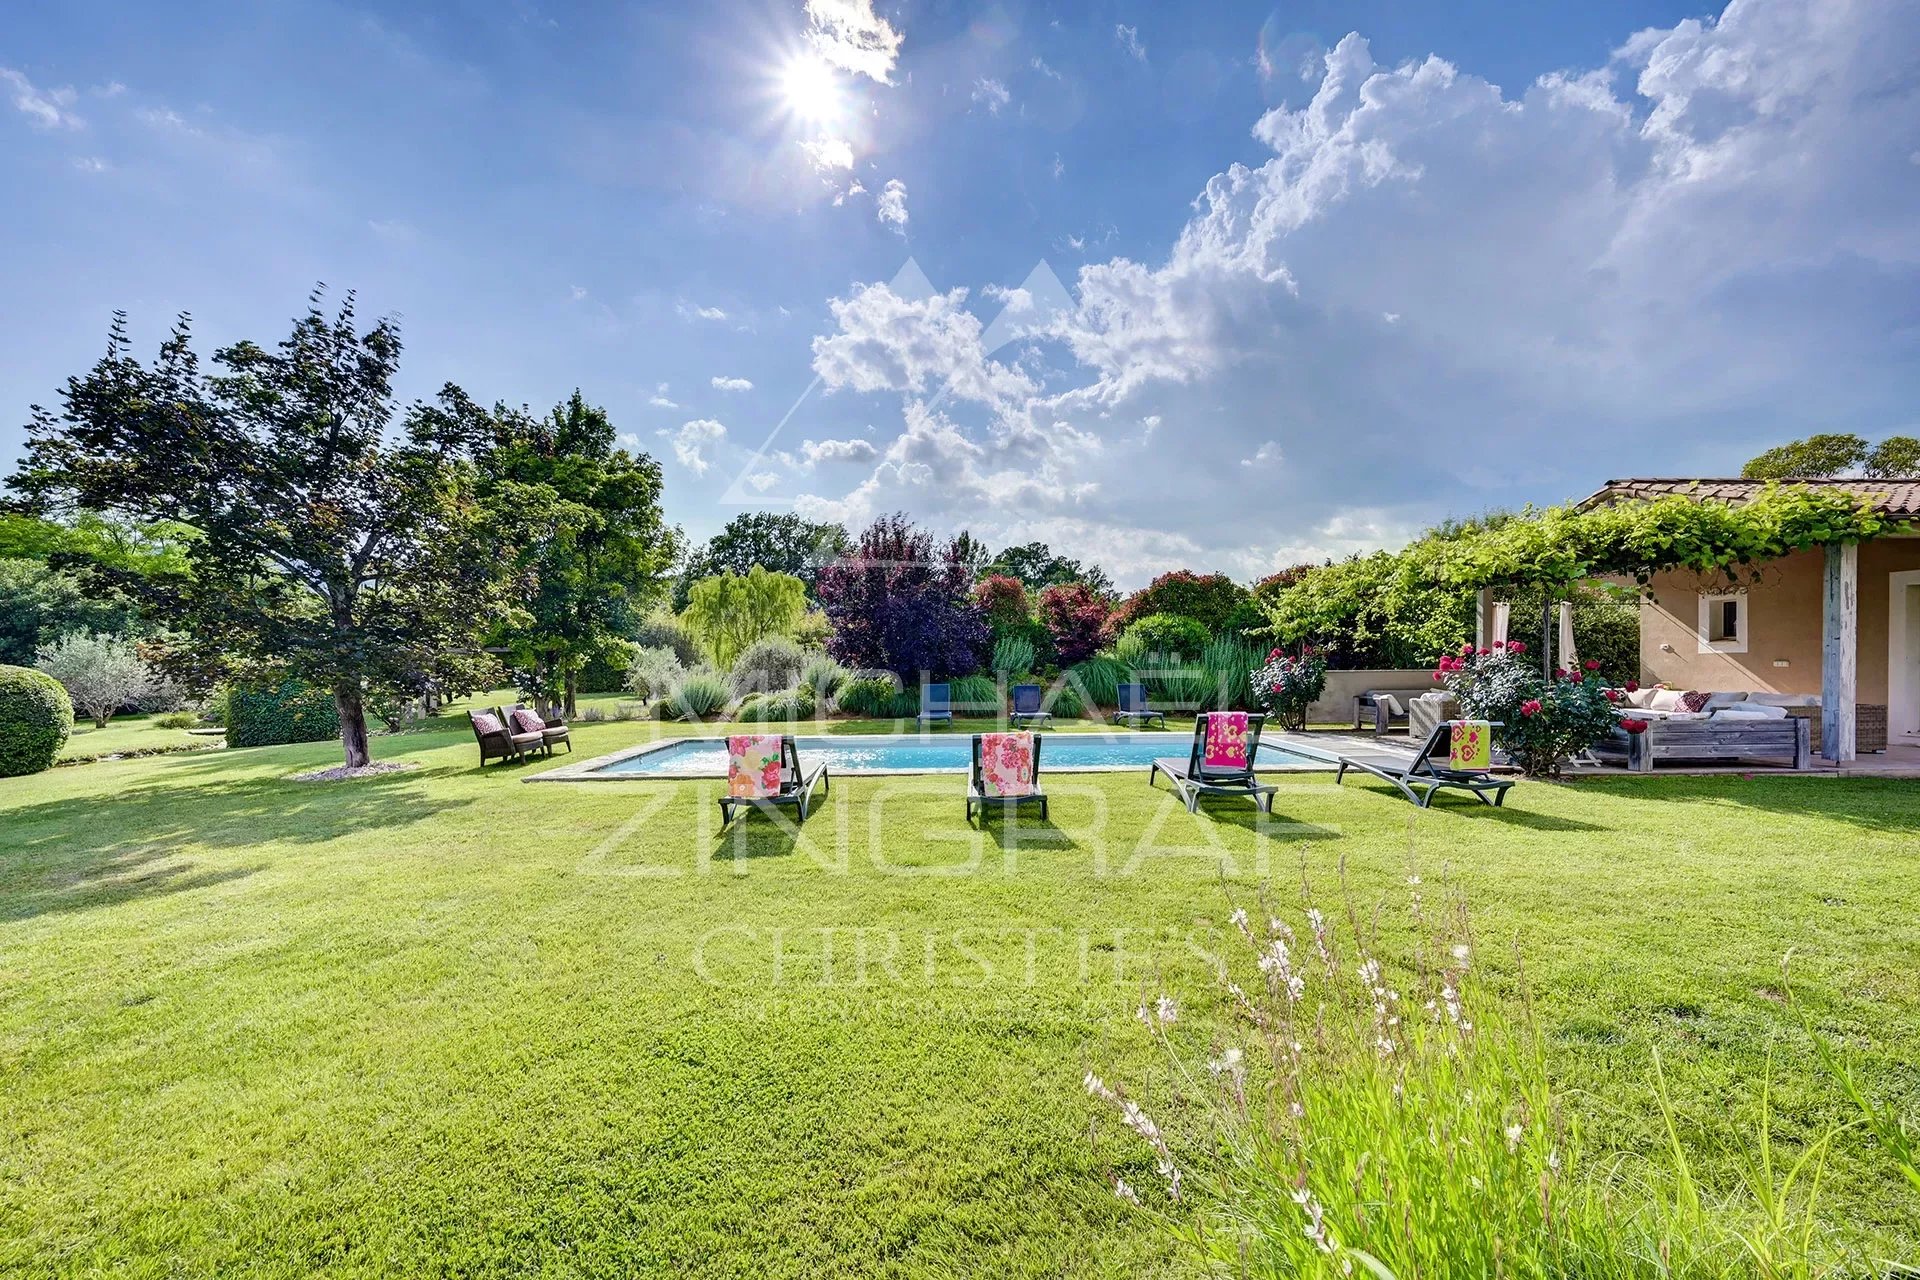 Saint-Saturnin-lès-Apt - Exceptional property with guest house and swimming pools